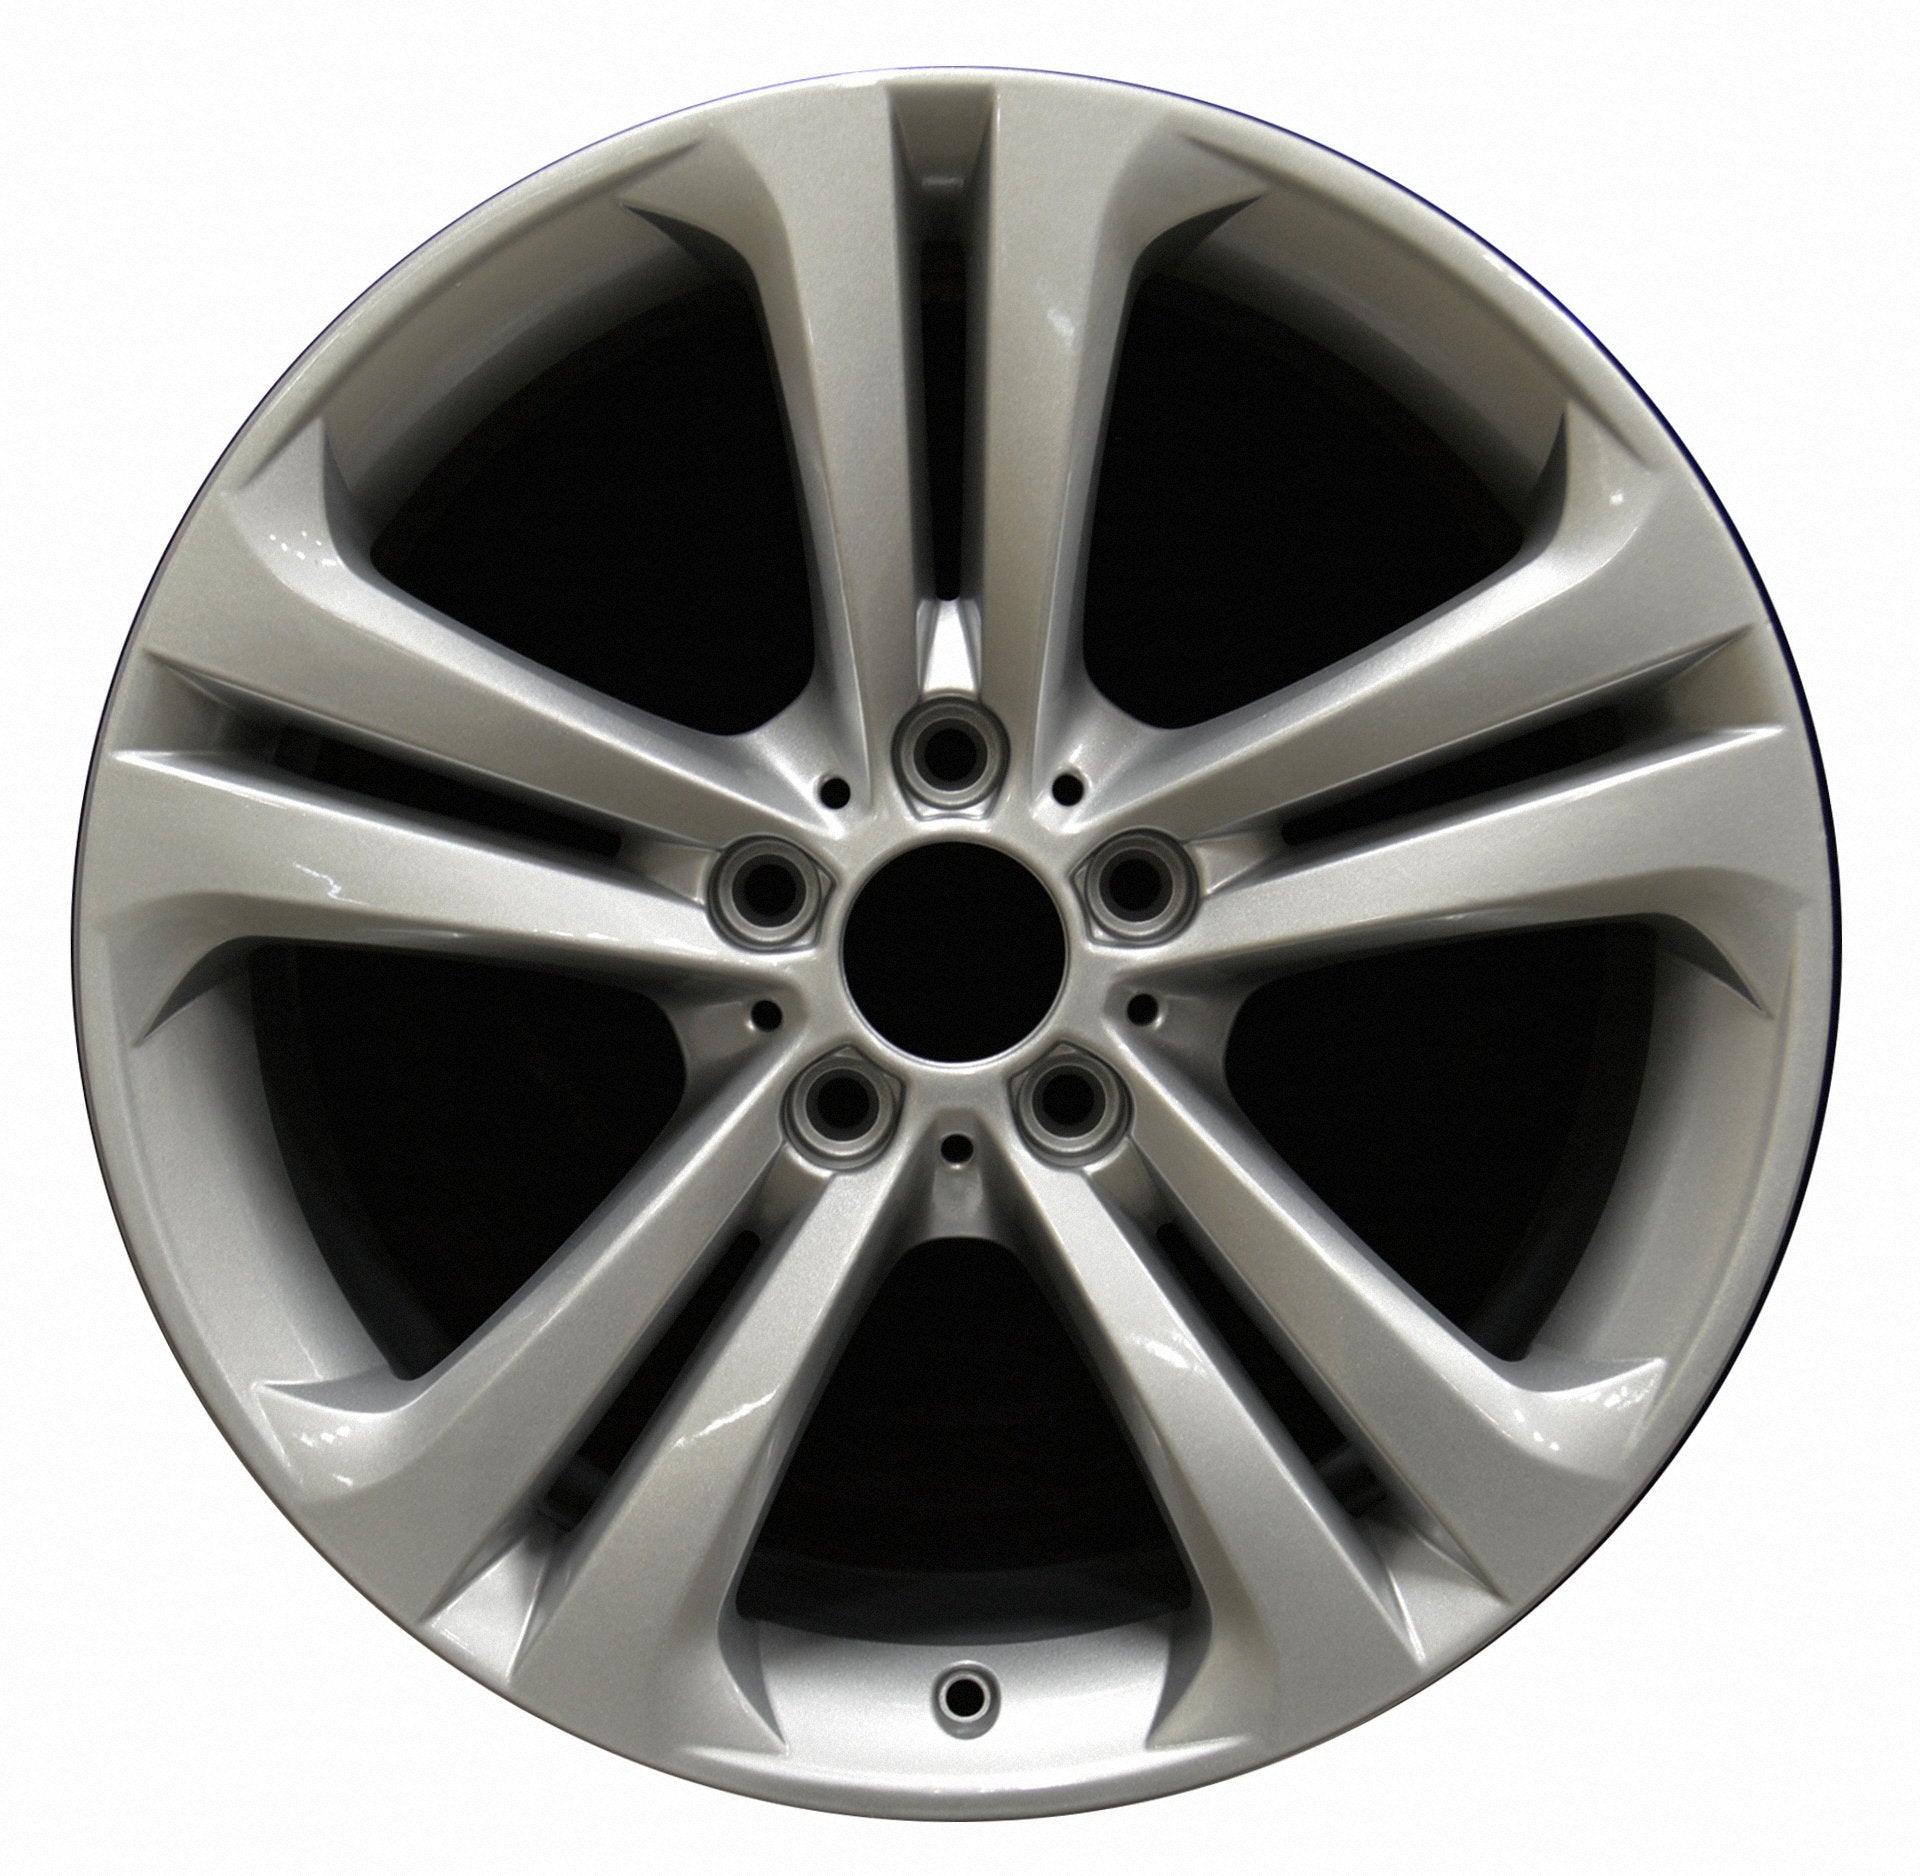 BMW 335i  2012, 2013, 2014, 2015 Factory OEM Car Wheel Size 19x8 Alloy WAO.71546FT.PS10.FF